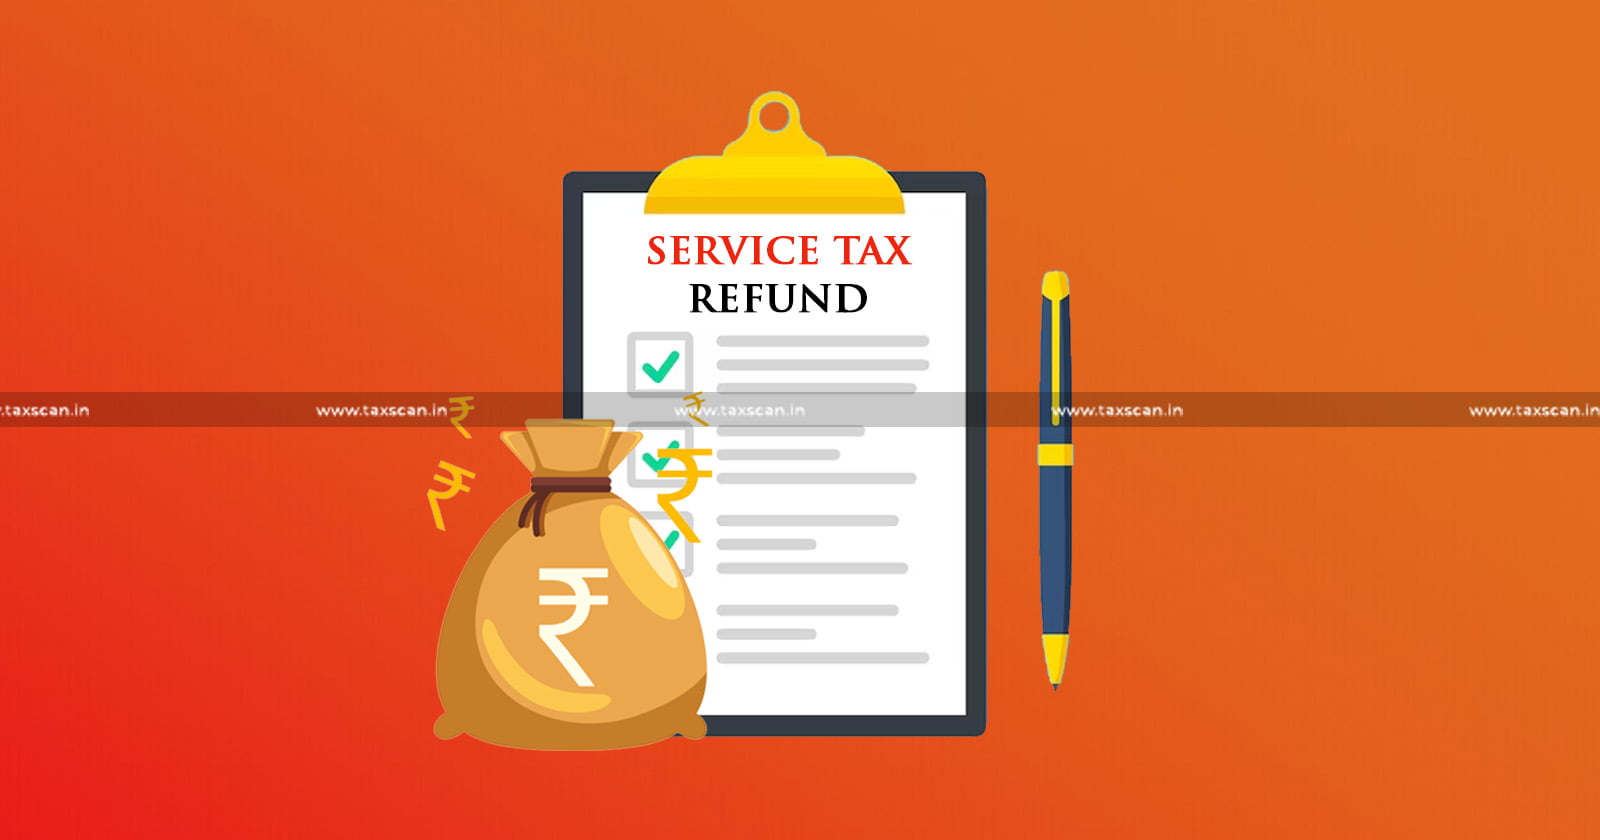 Service Tax Refund - Service Tax - Non-Filing of Reply During Covid-19 Pandemic - Bombay High Court directs Readjudication - Bombay High Court - Taxscan